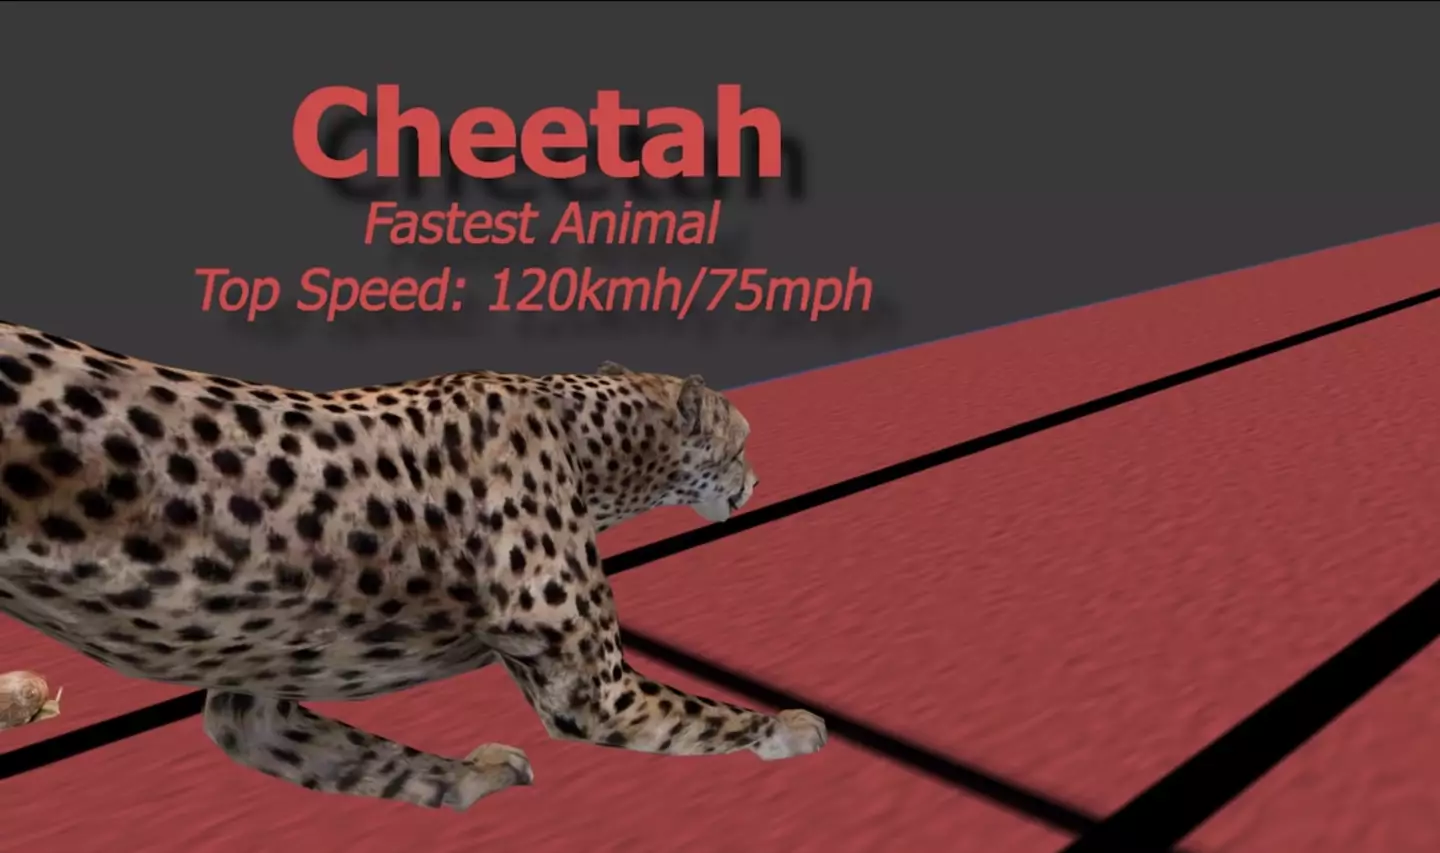 The cheetah wins hands - paws - down.